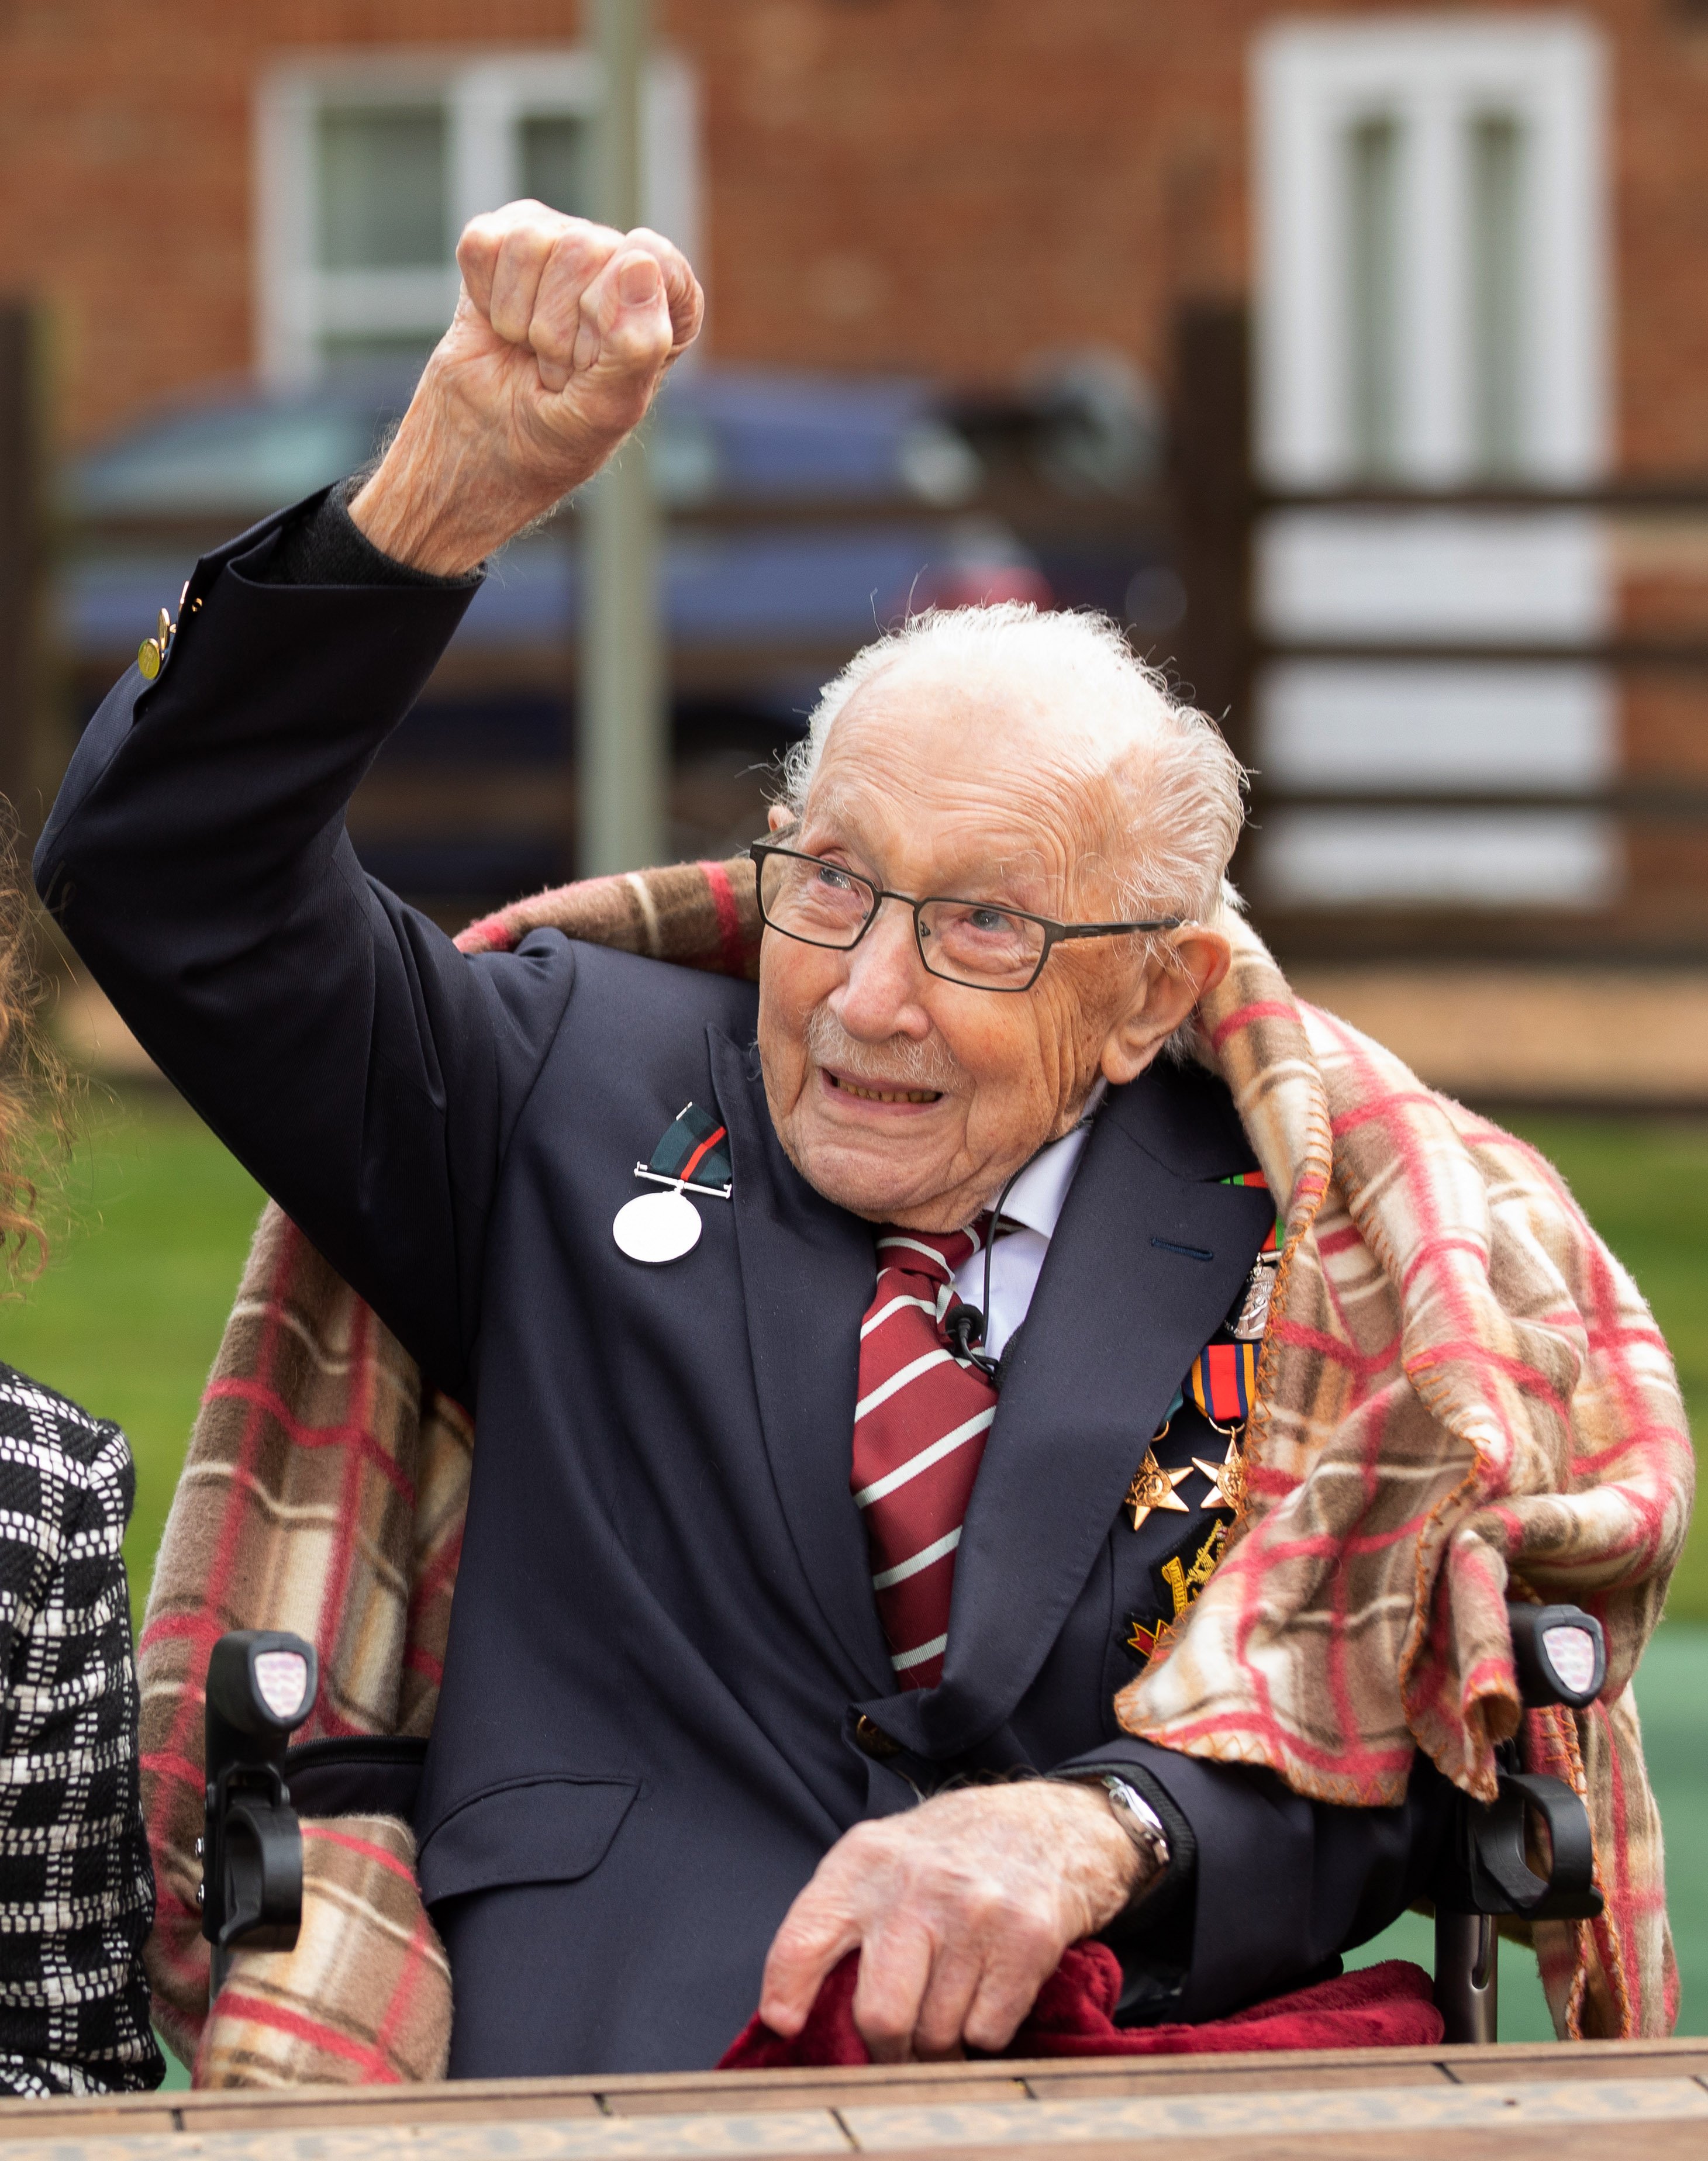 Colonel Tom Moore and his daughter Hannah celebrate his 100th birthday on April 30, 2020, in Marston Moretaine, England. | Source: Getty Images.